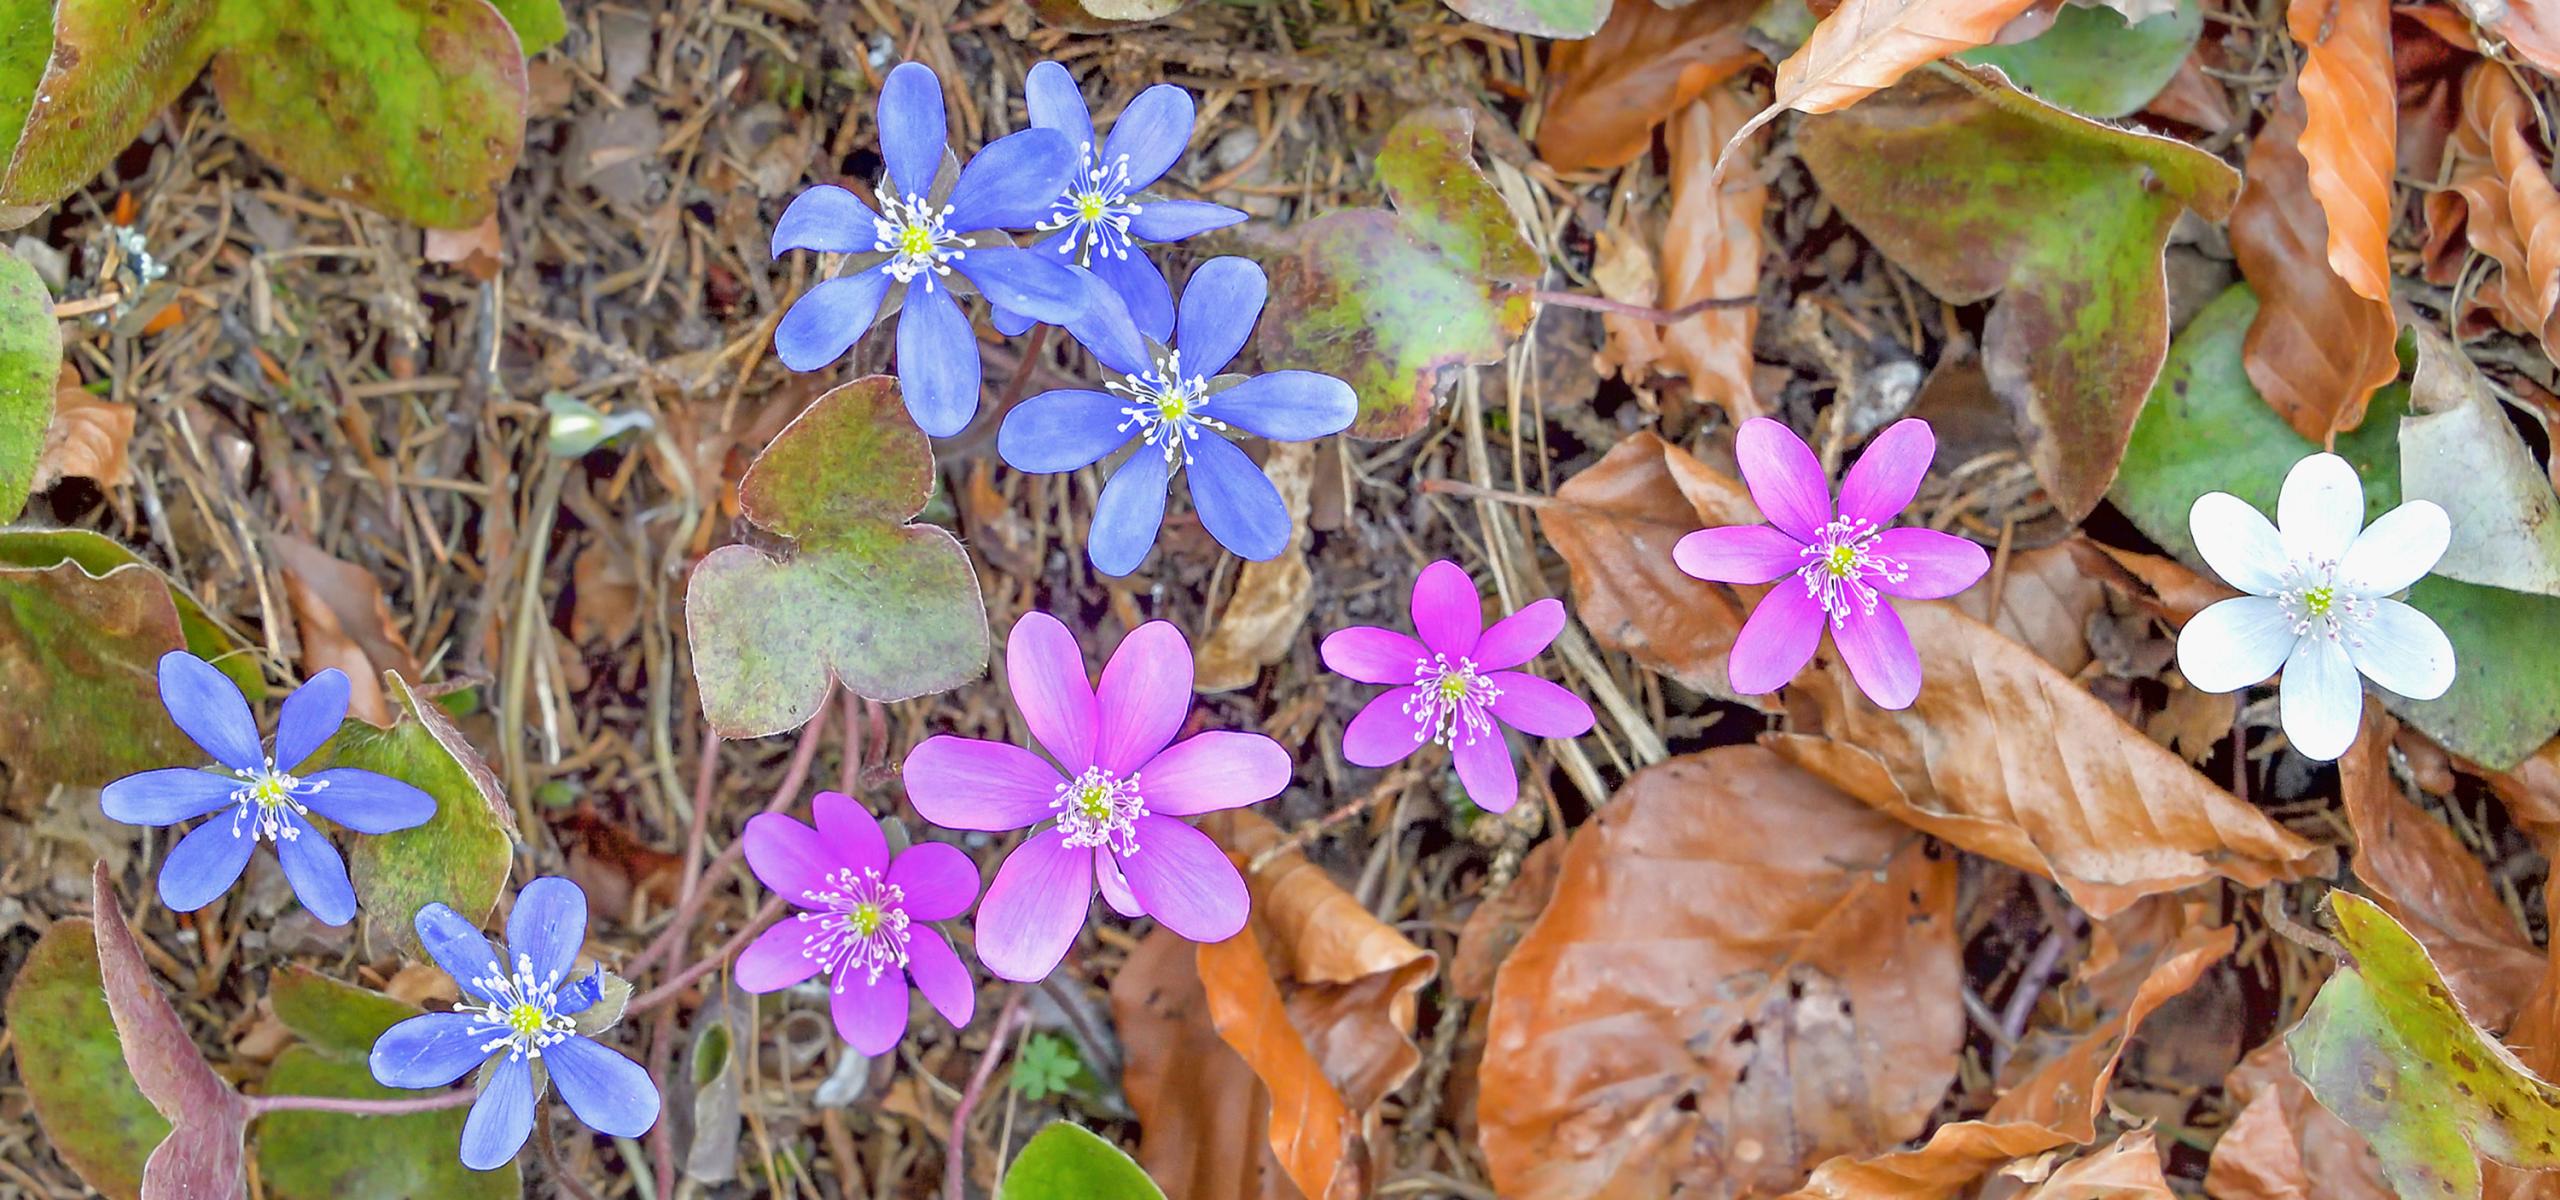 Small liverwort flowers in three color variations pink blue and white